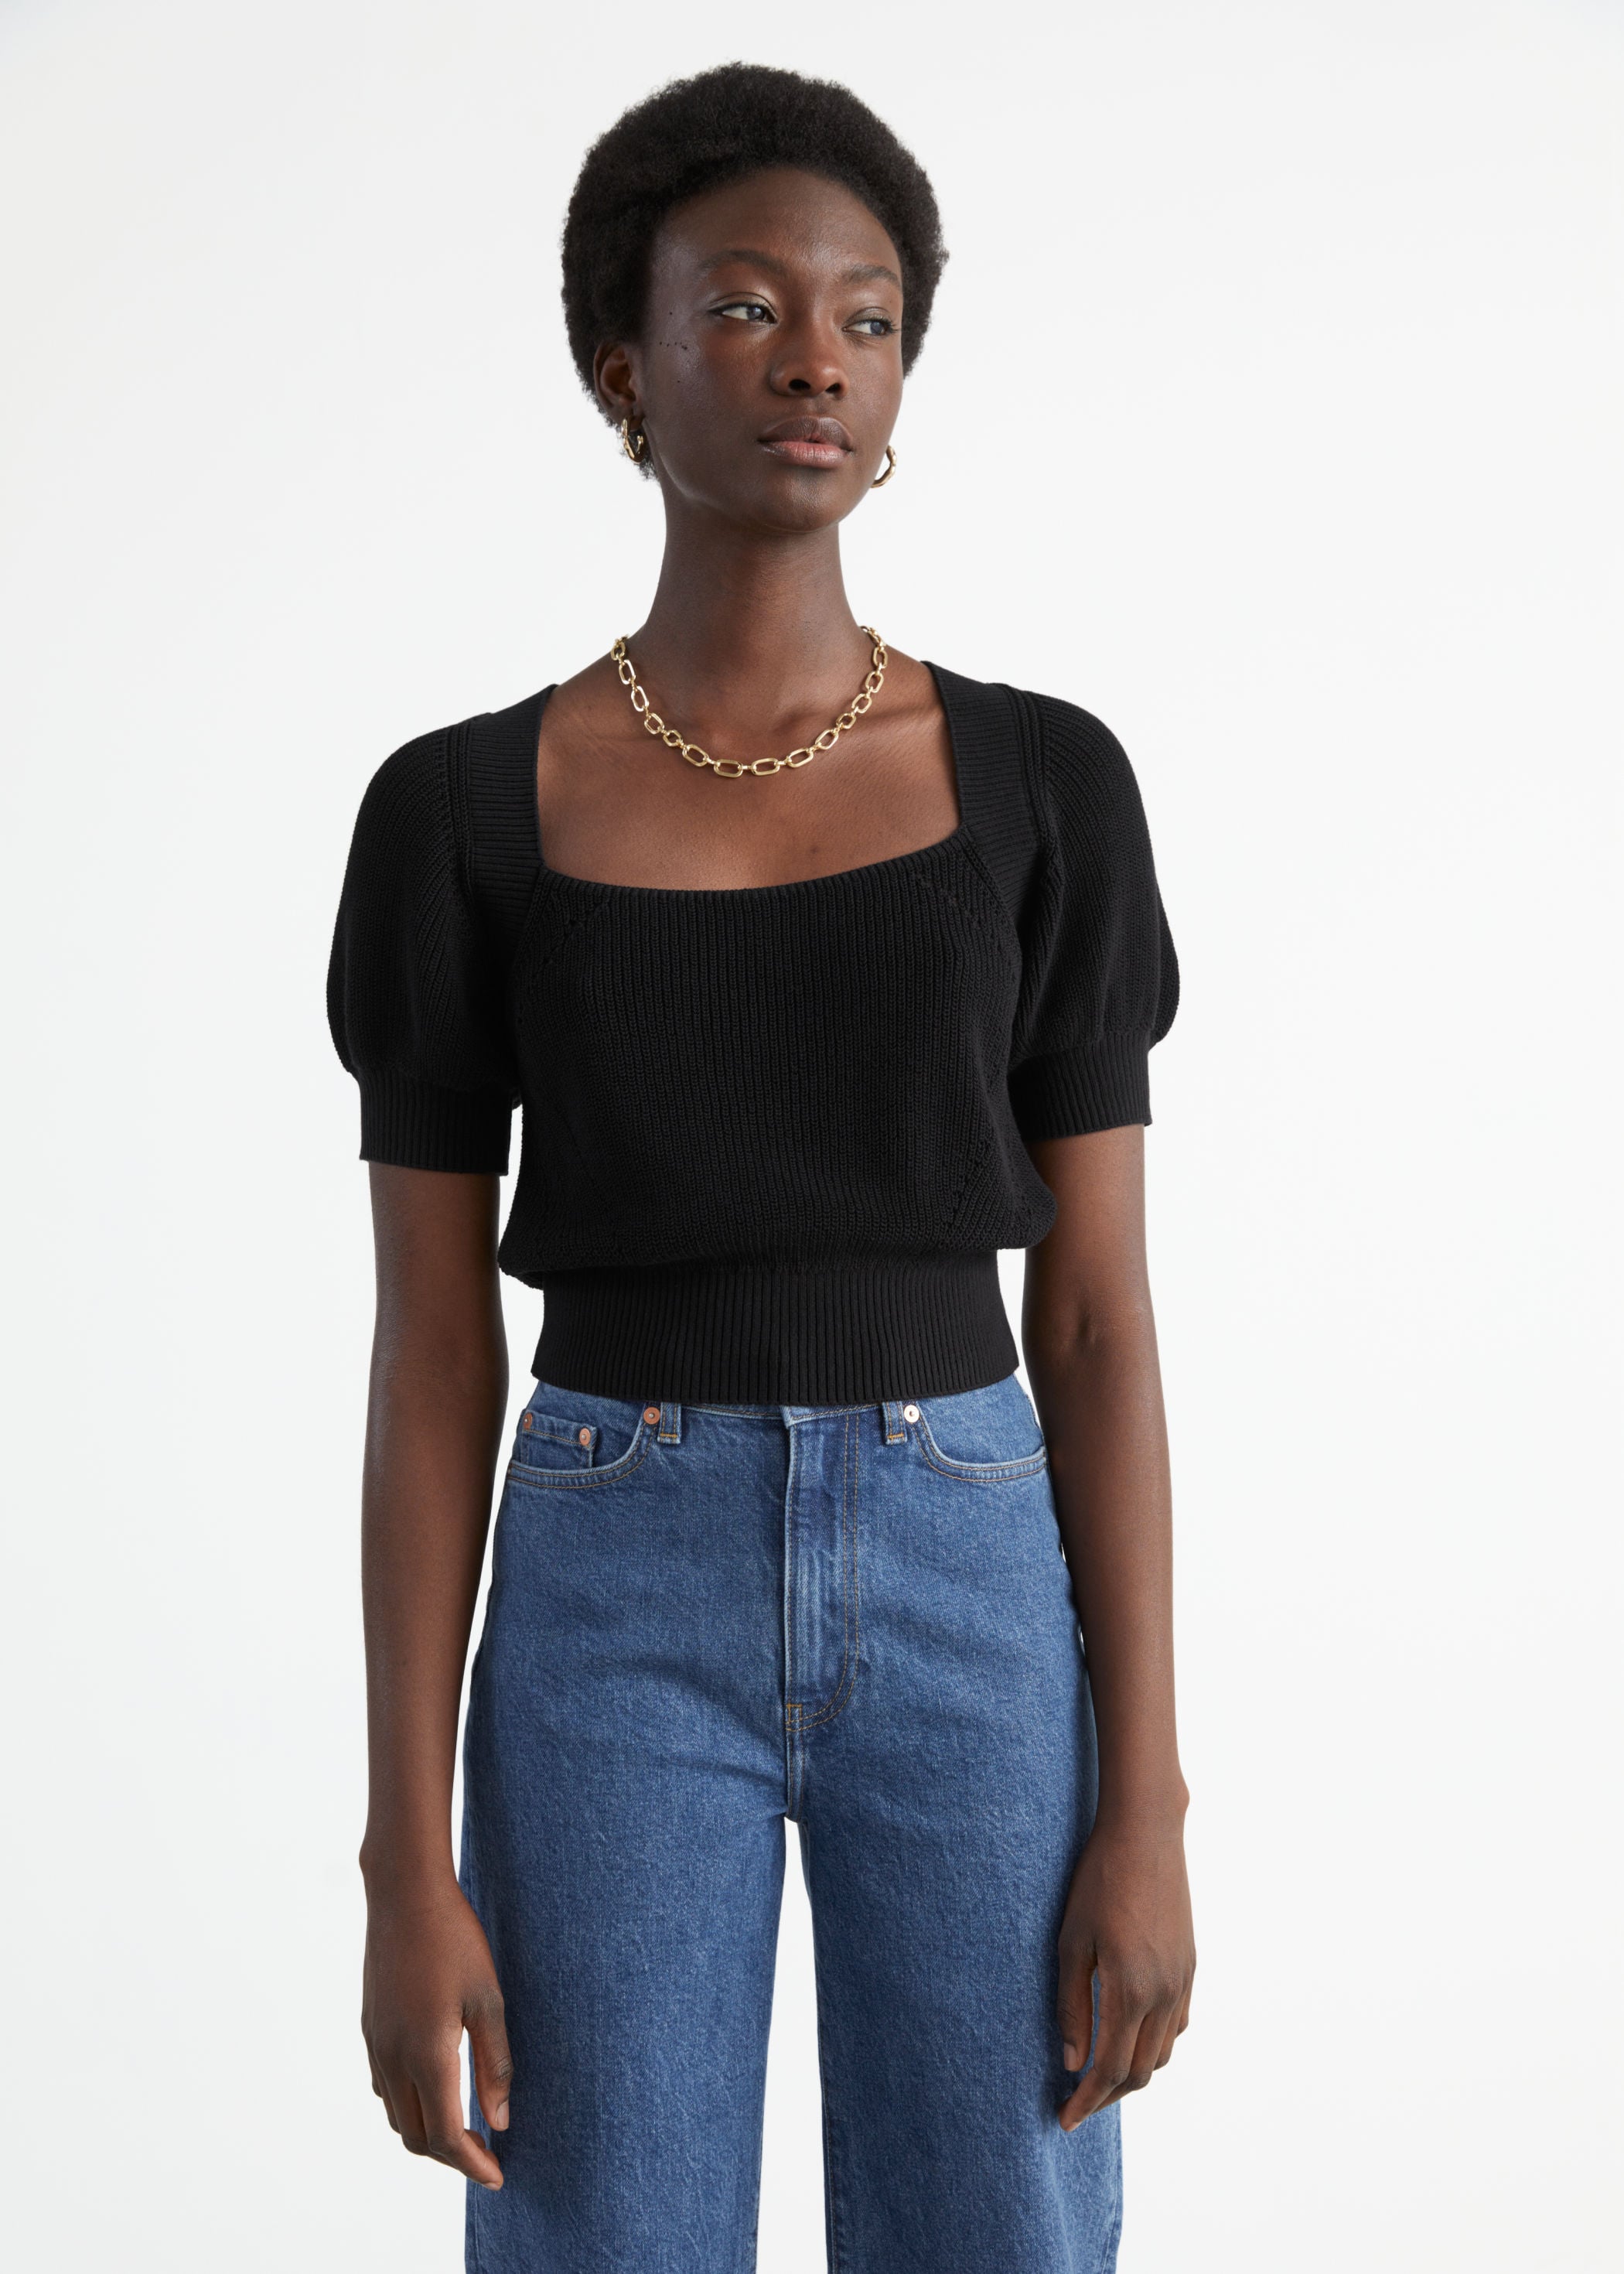 Square Neck Top - Buy Square Neck Top online at Best Prices in